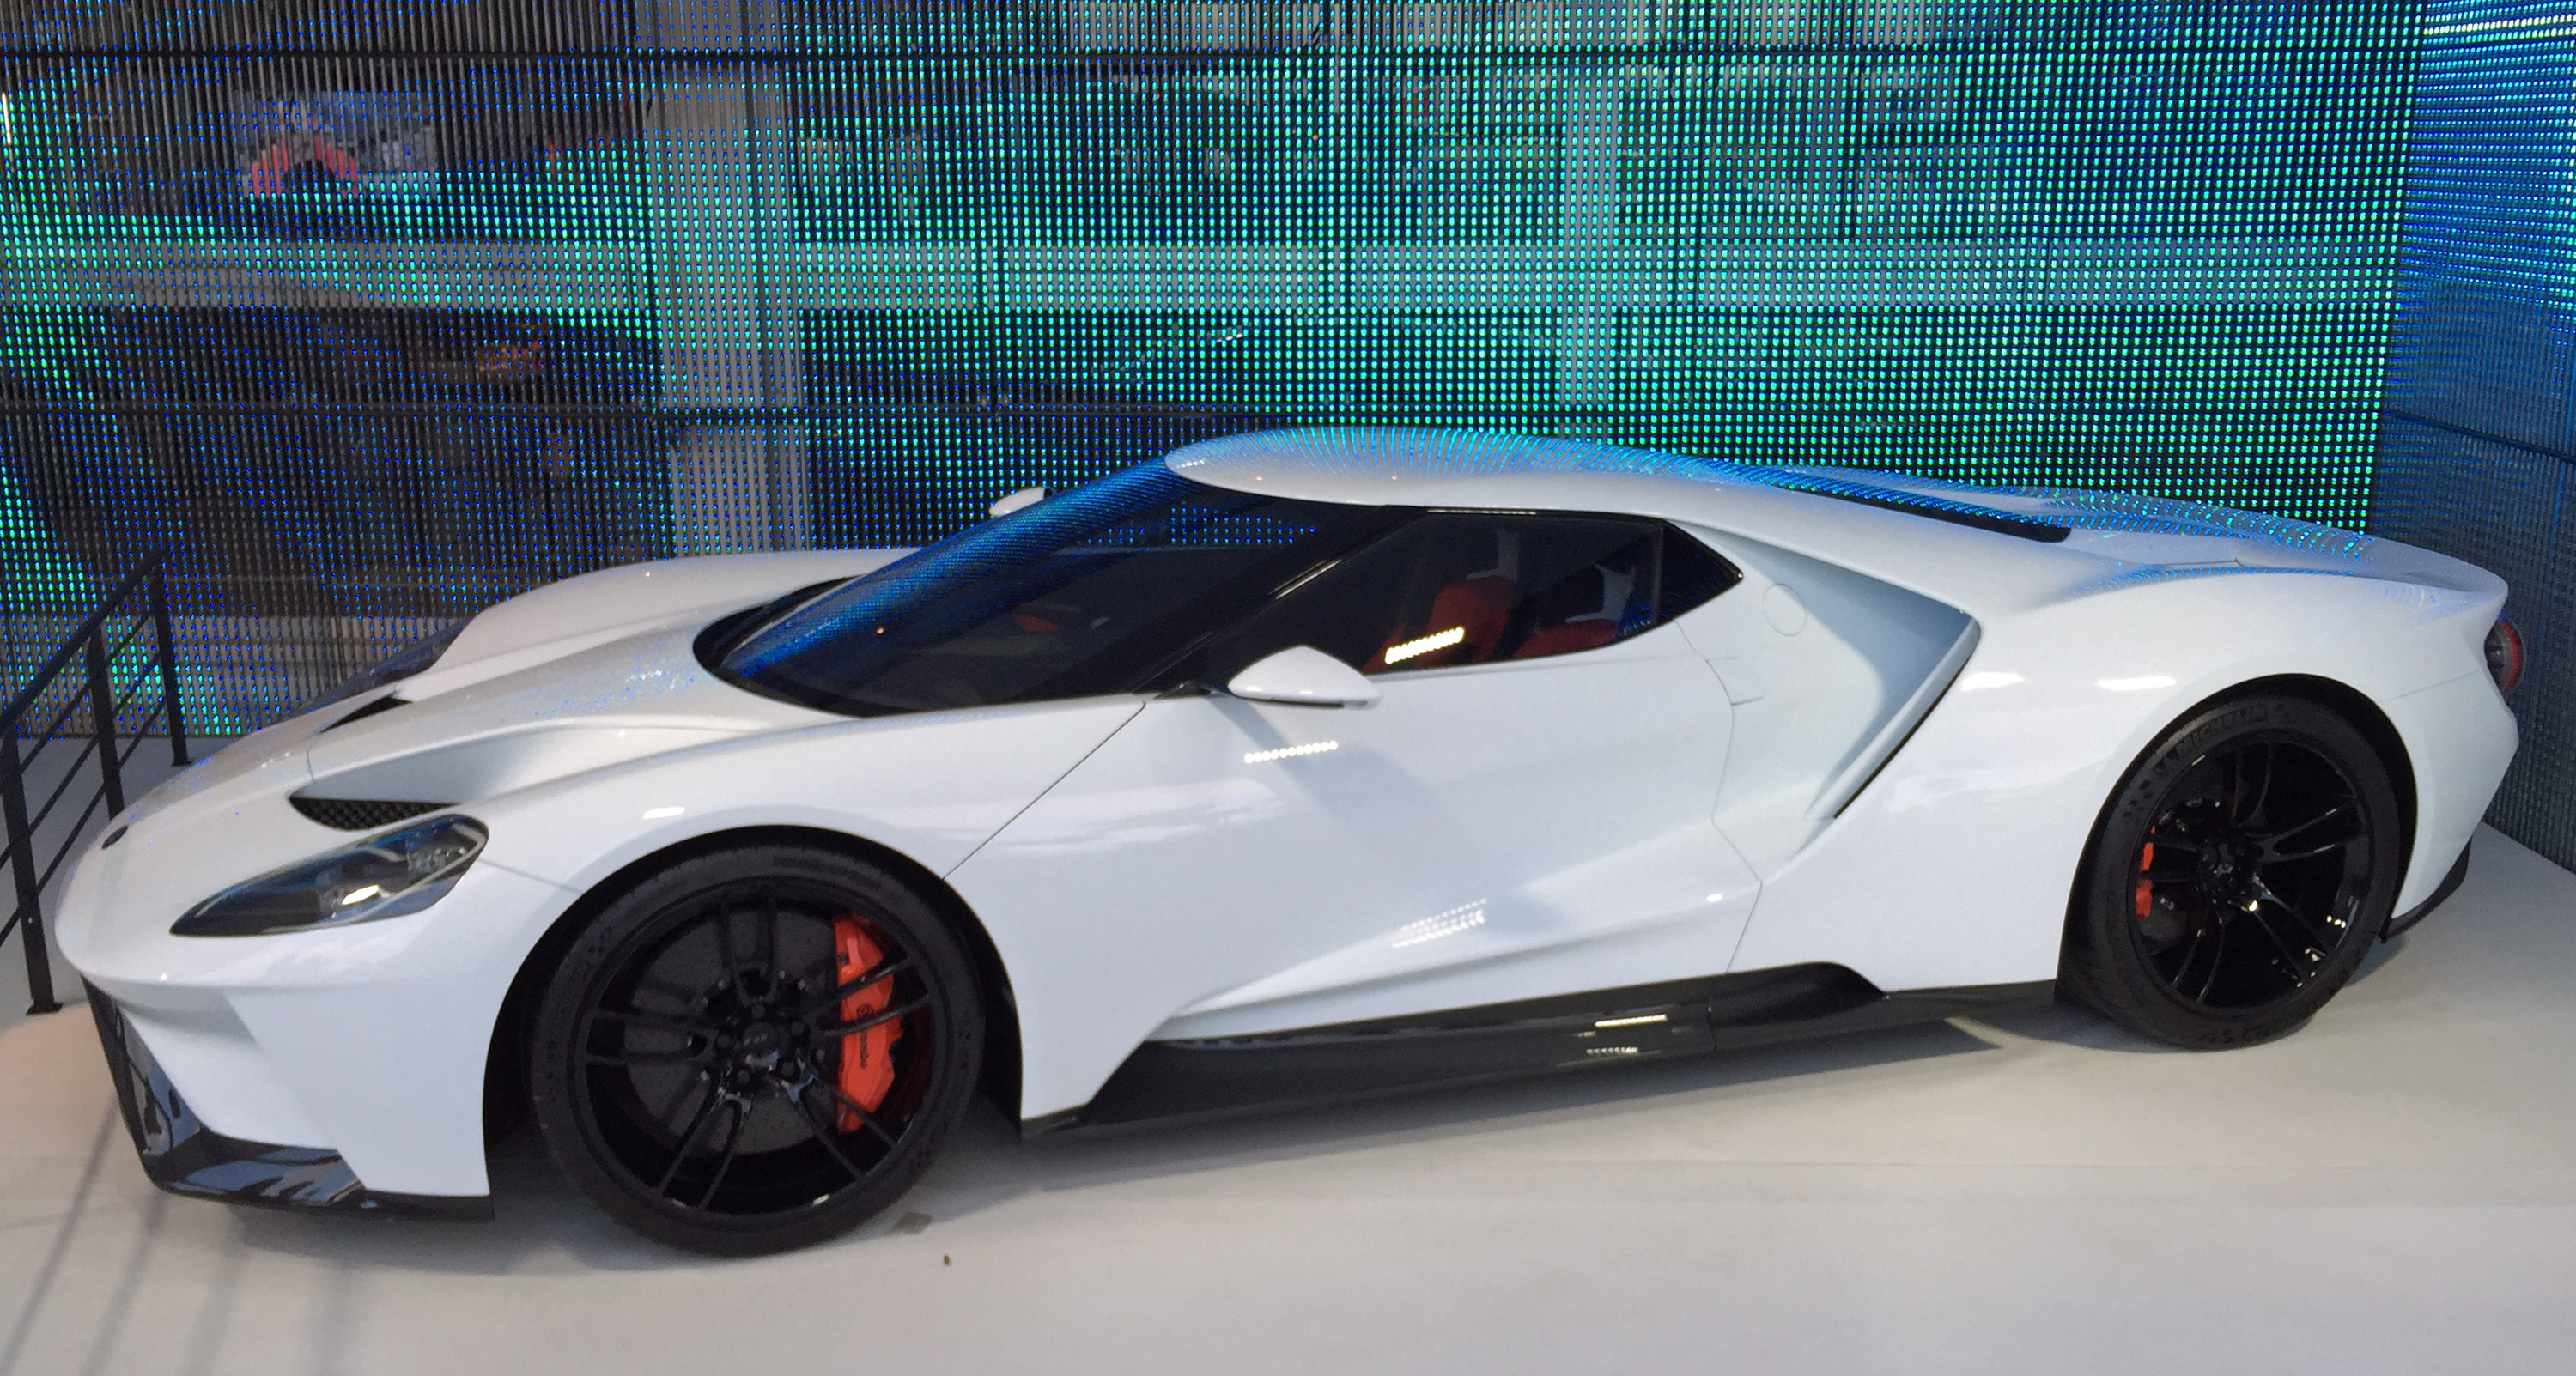 New Ford GT "body in white"